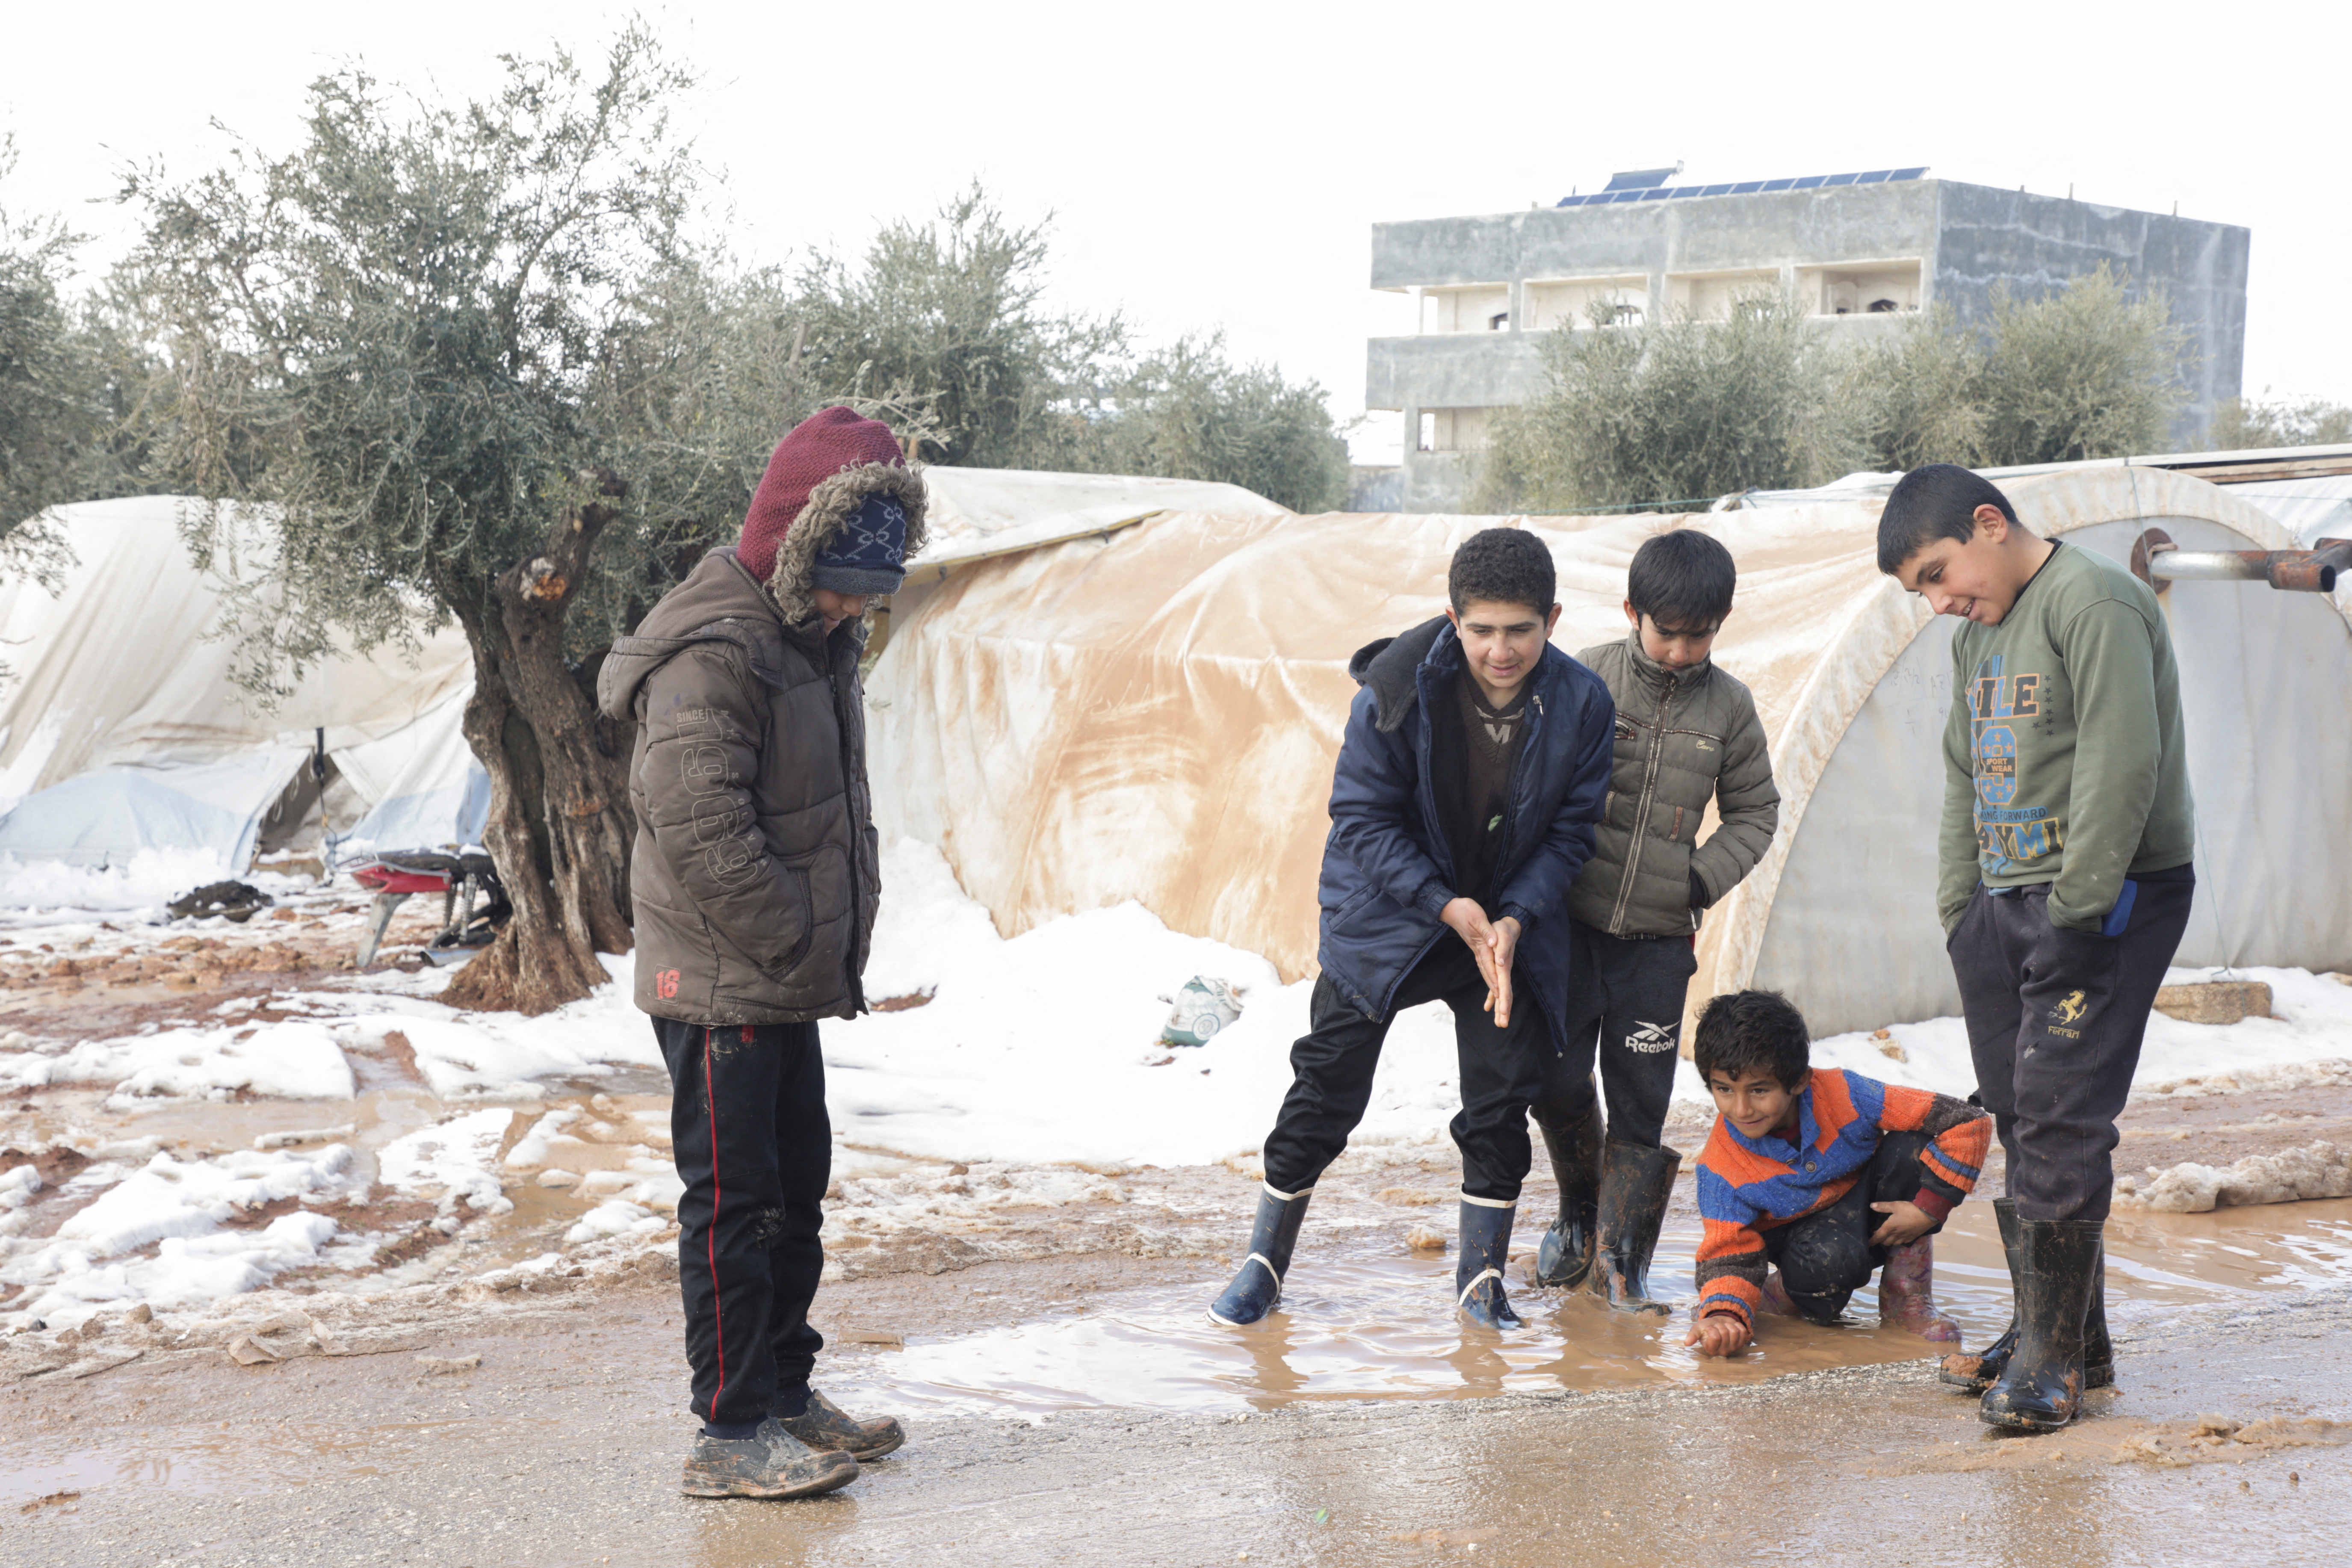 Internally displaced boys play together at a snow covered camp in the Aleppo countryside